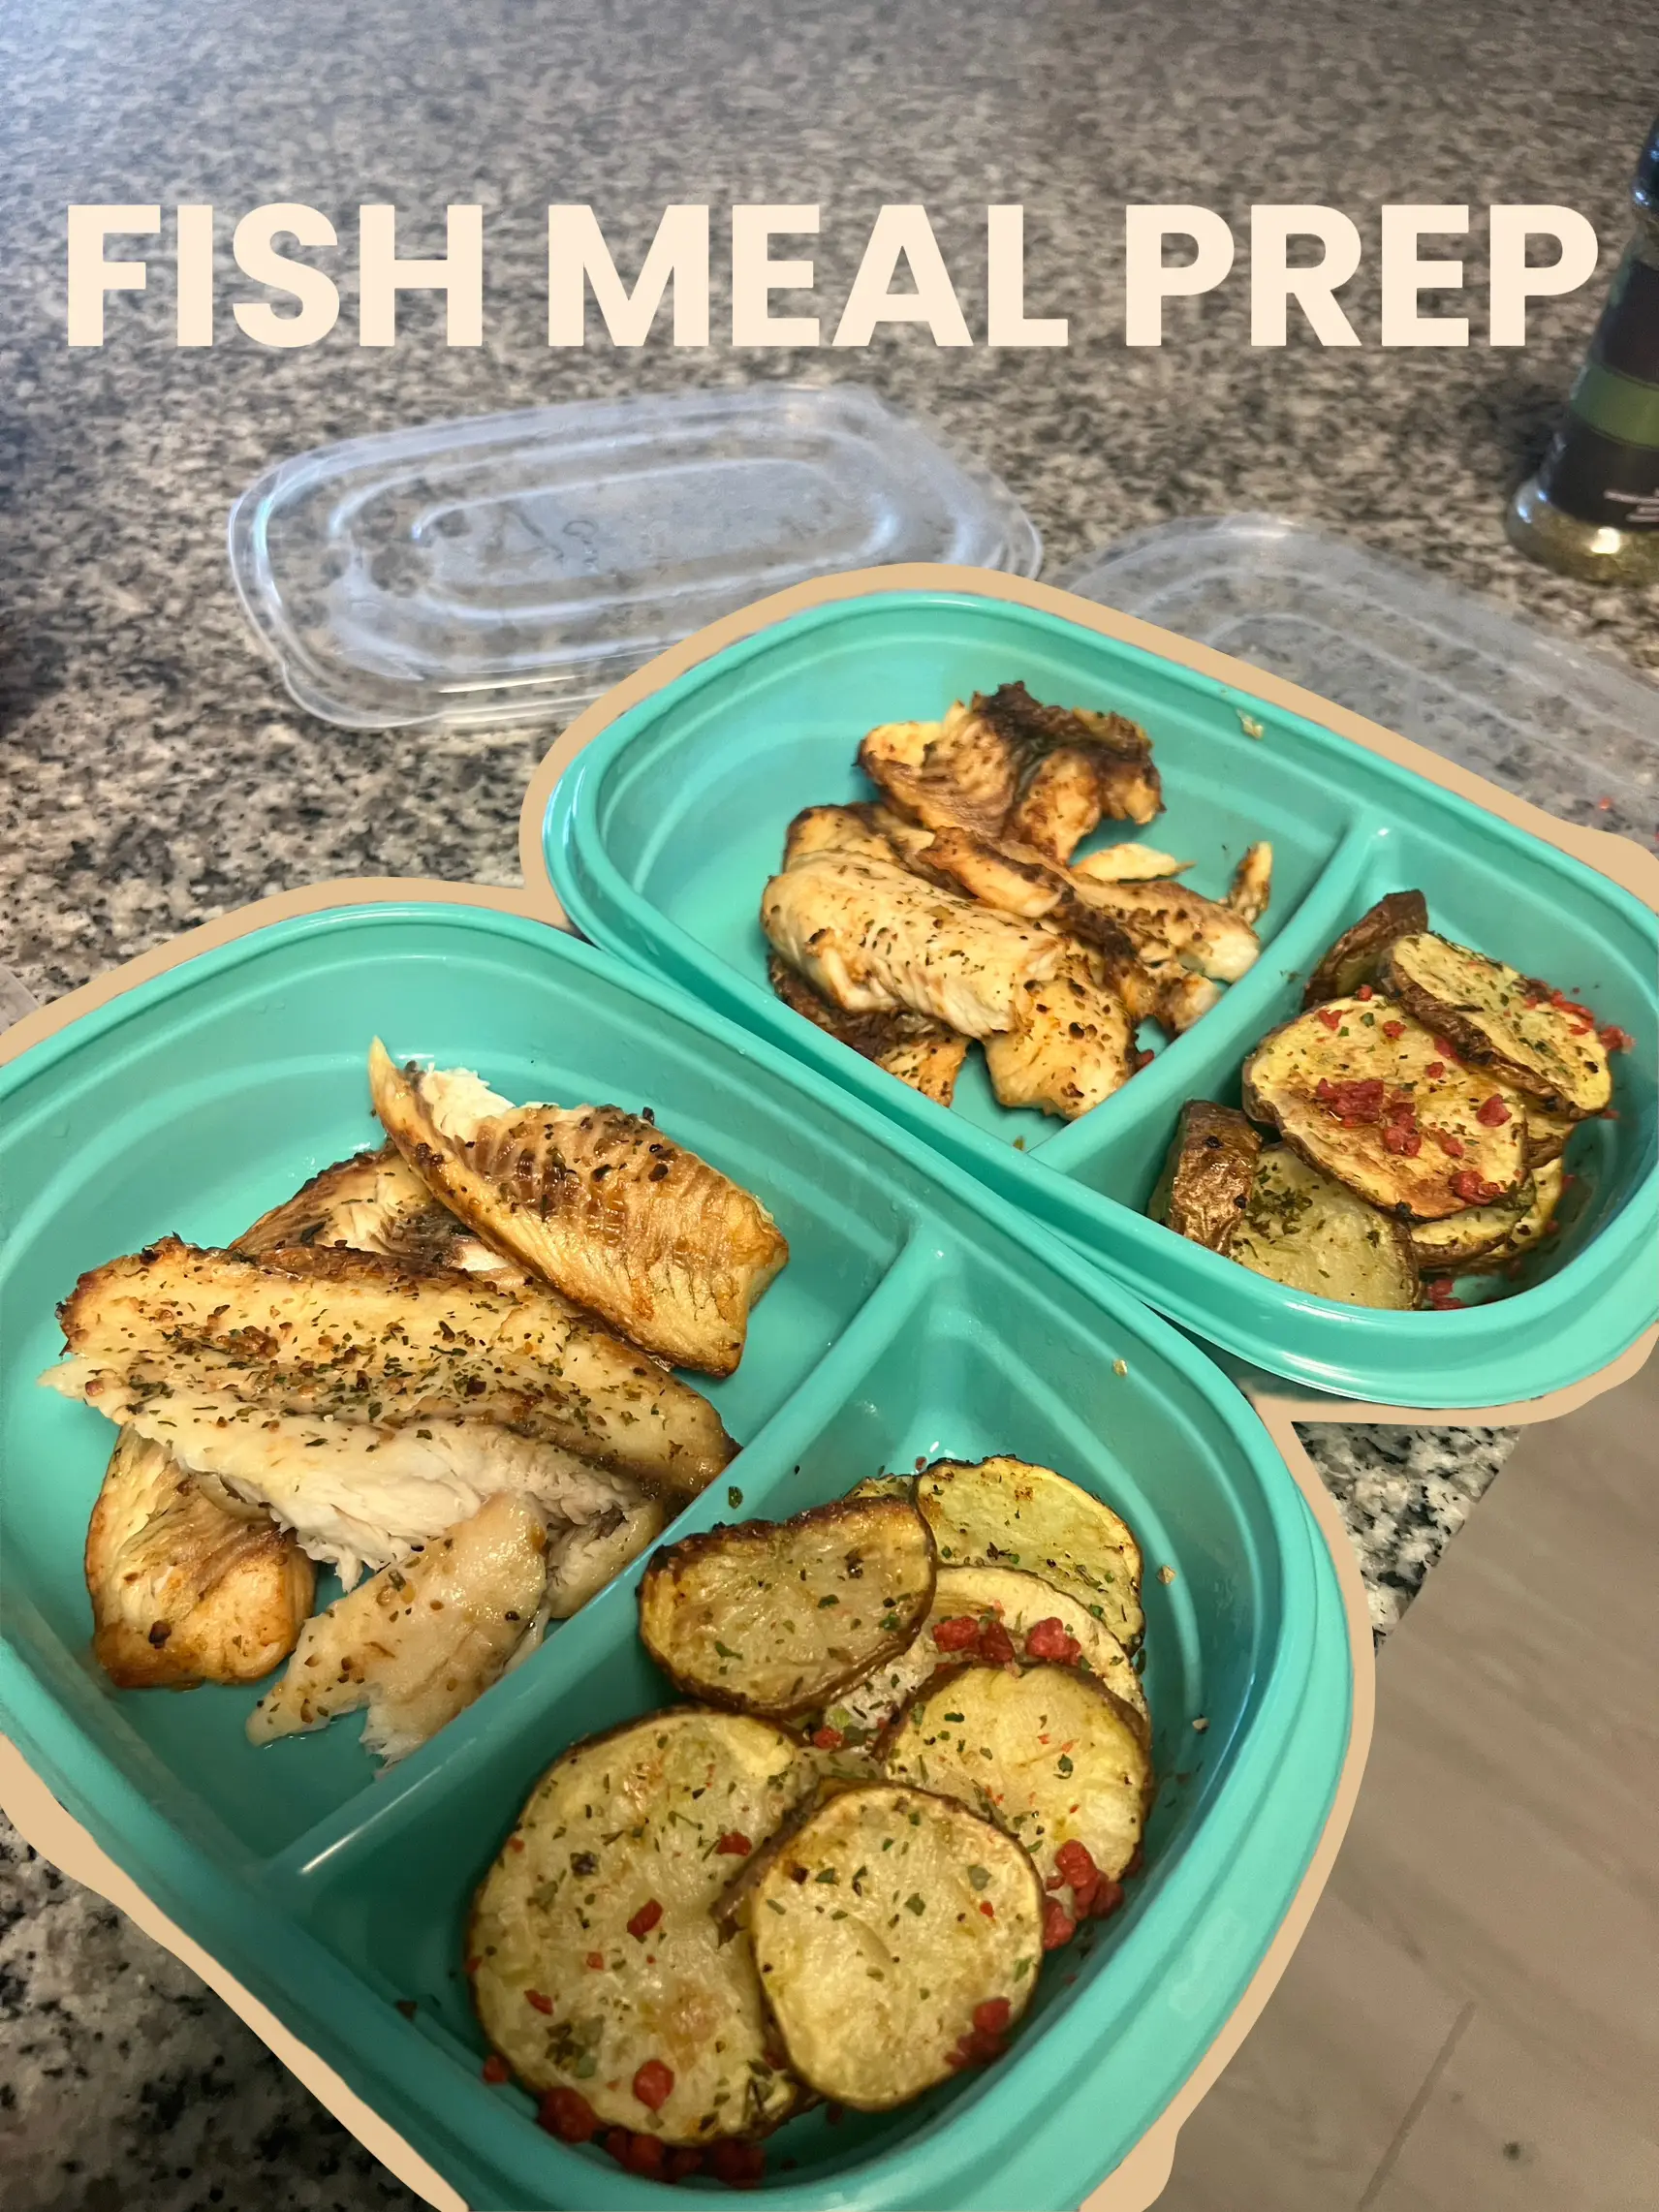 FISH MEAL PREP, Gallery posted by Nayeli 🌸